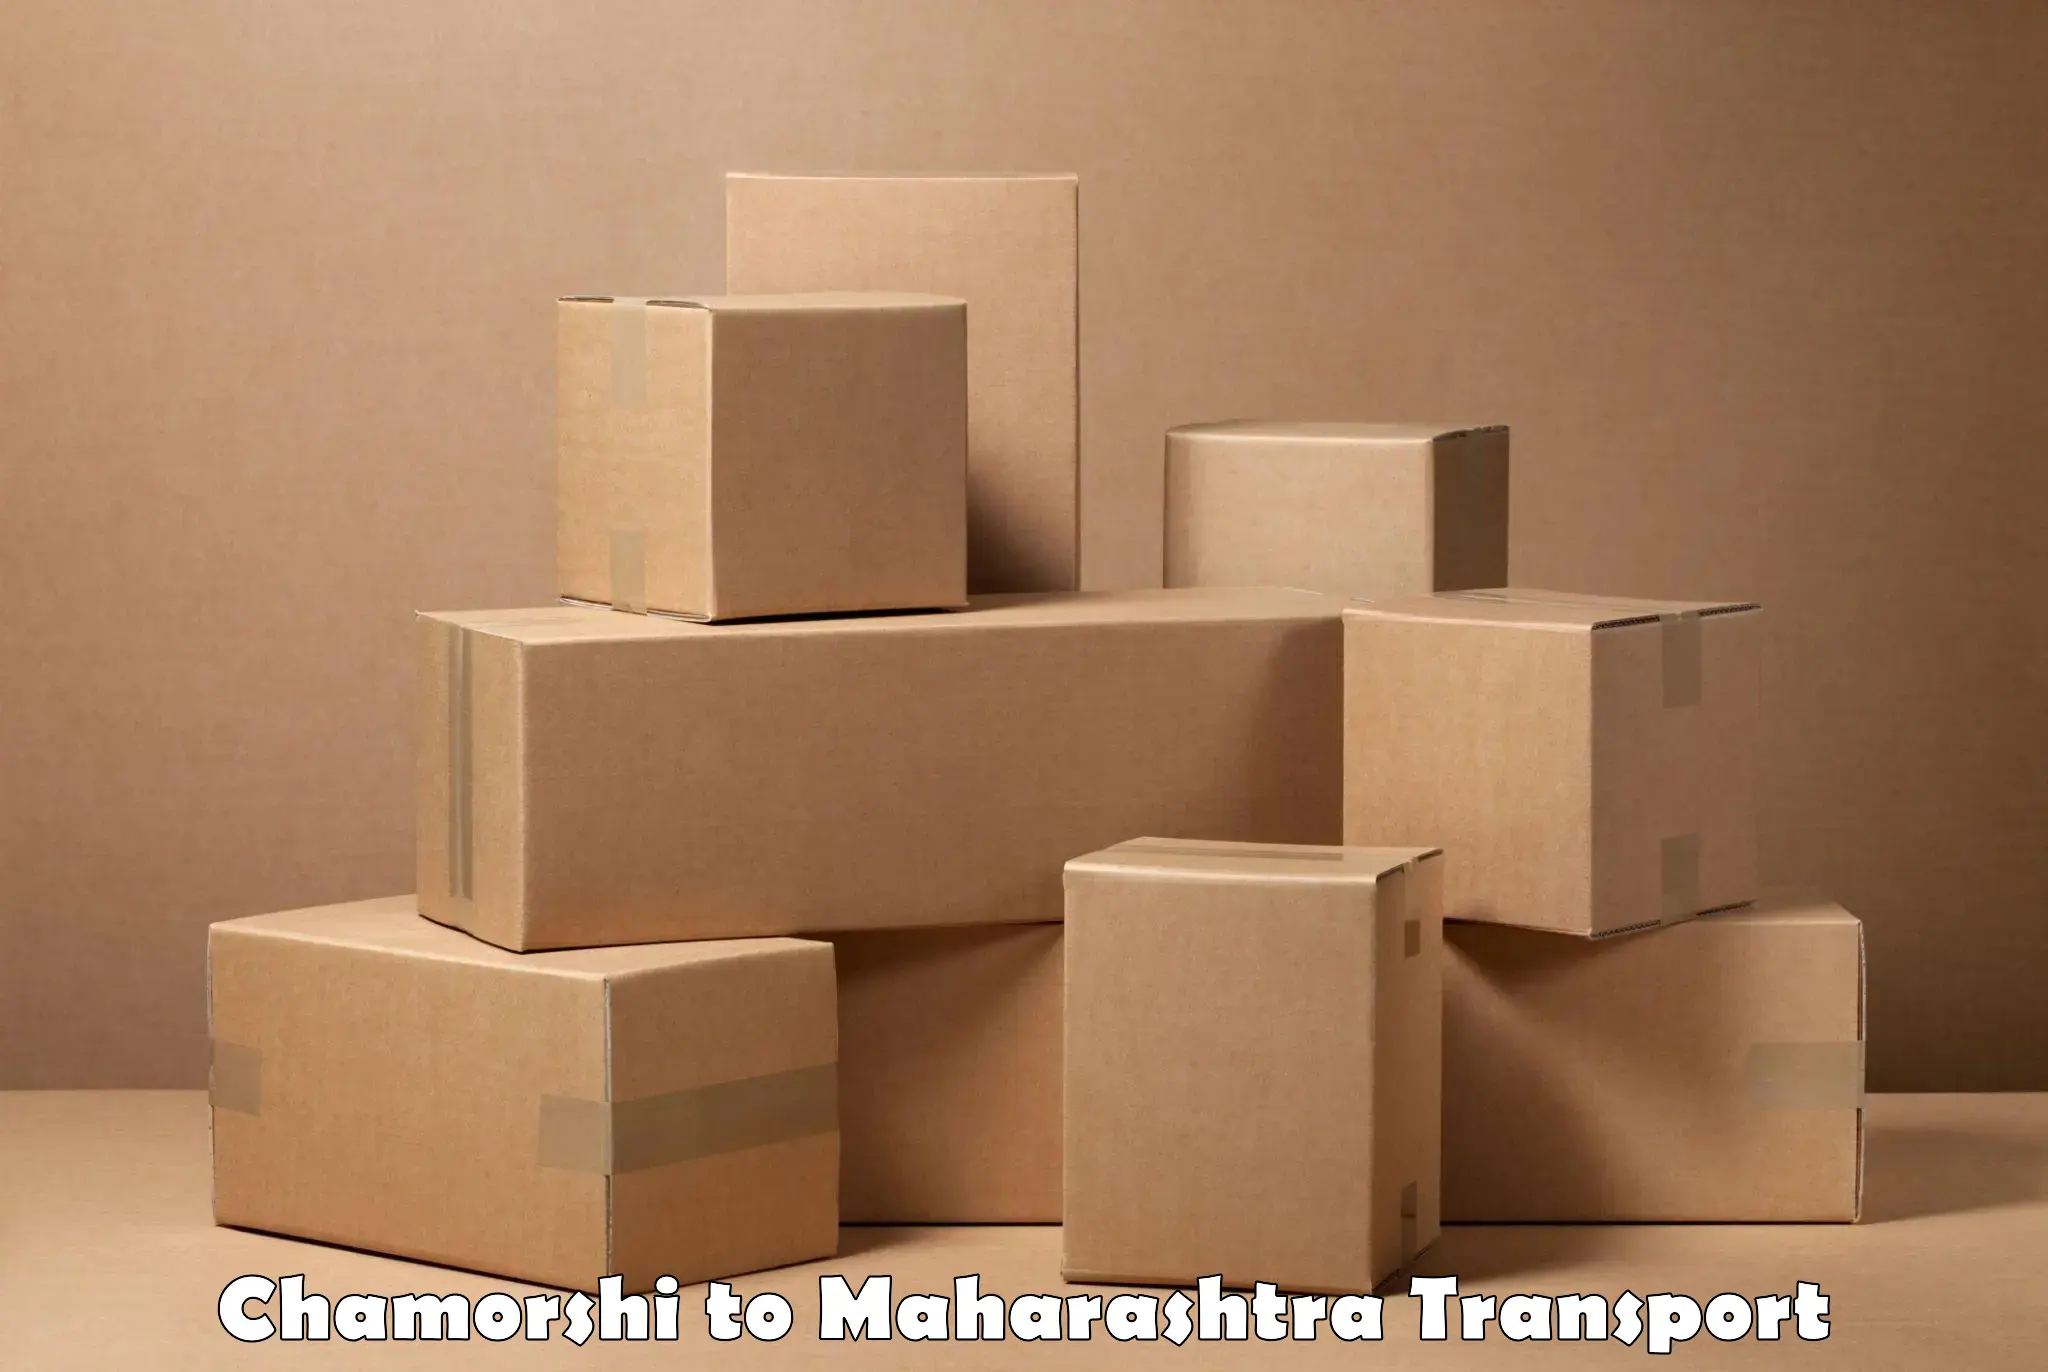 Container transport service Chamorshi to Chalisgaon